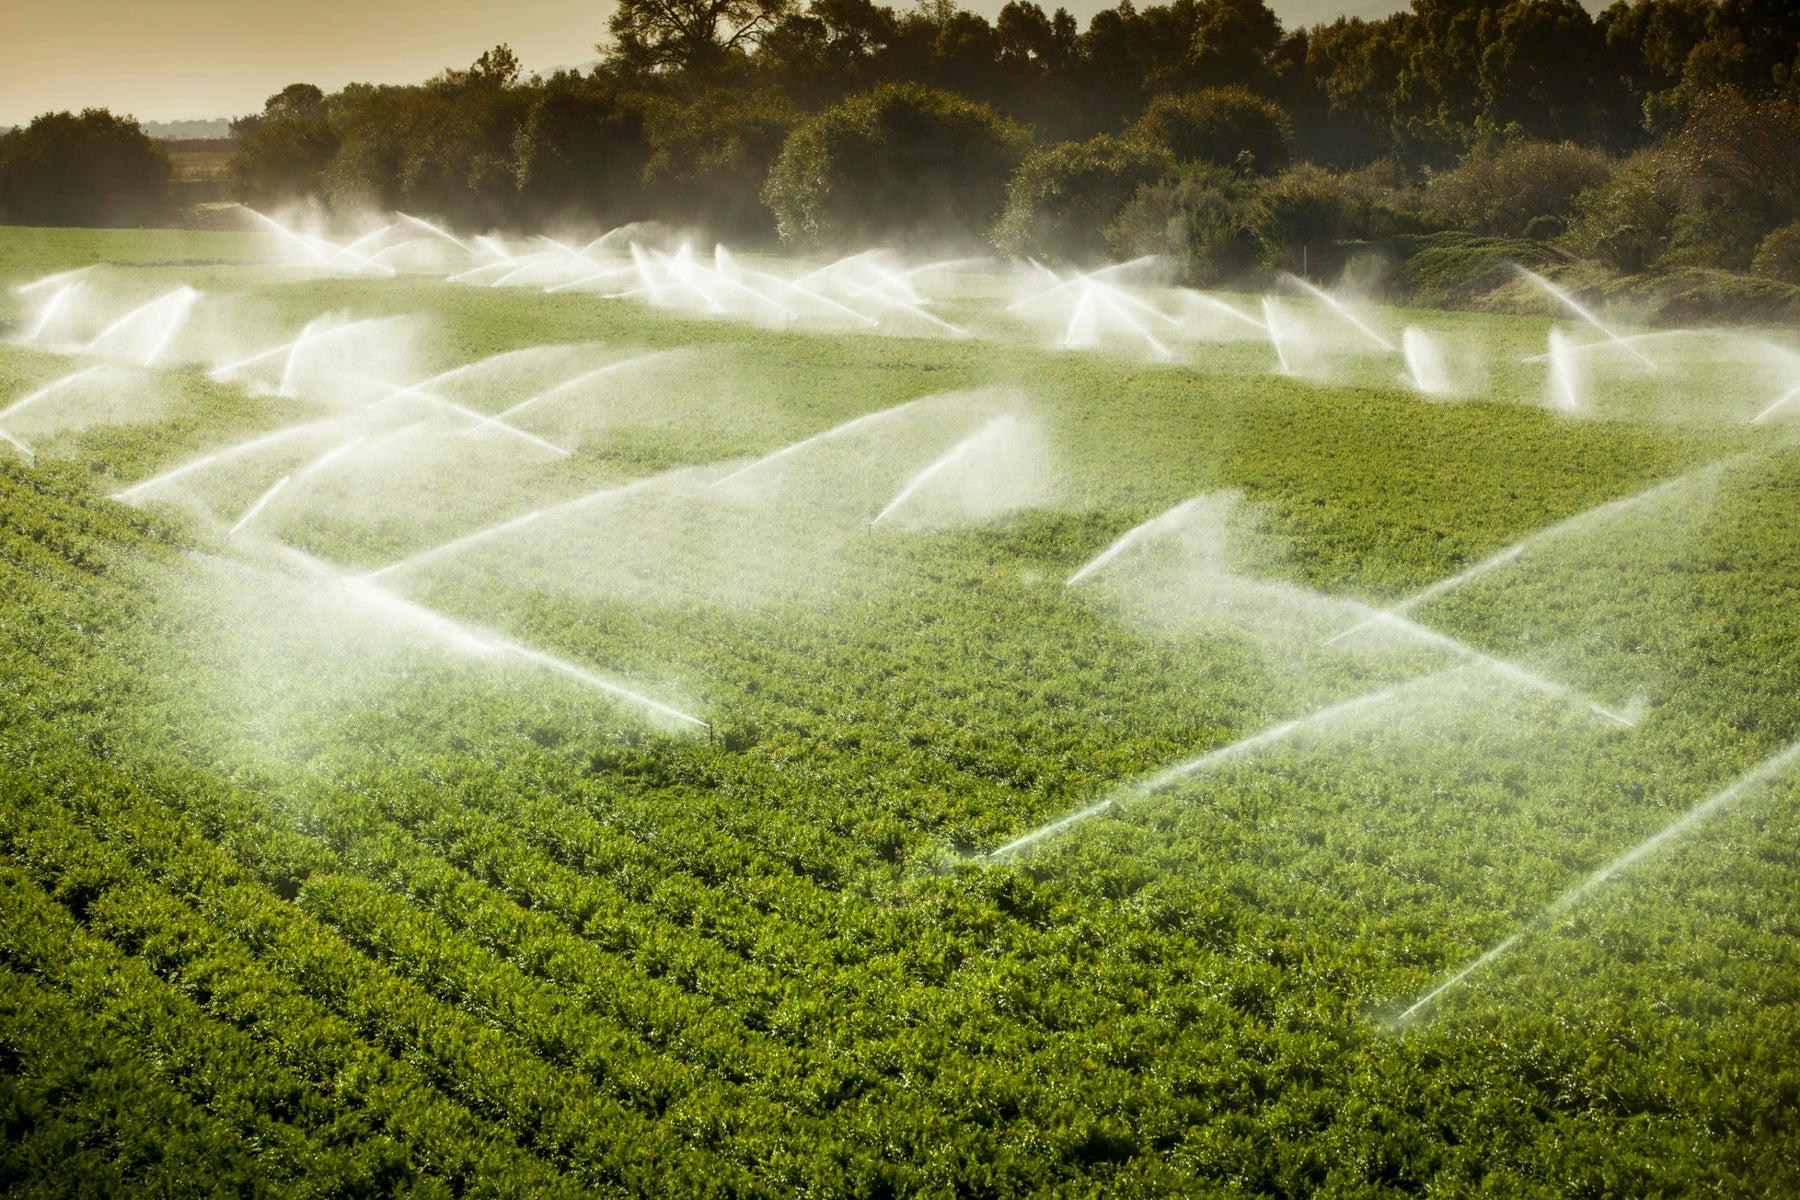 Irrigation with EnviroMonitor & mobilize helps farmers get more out of their water and efforts